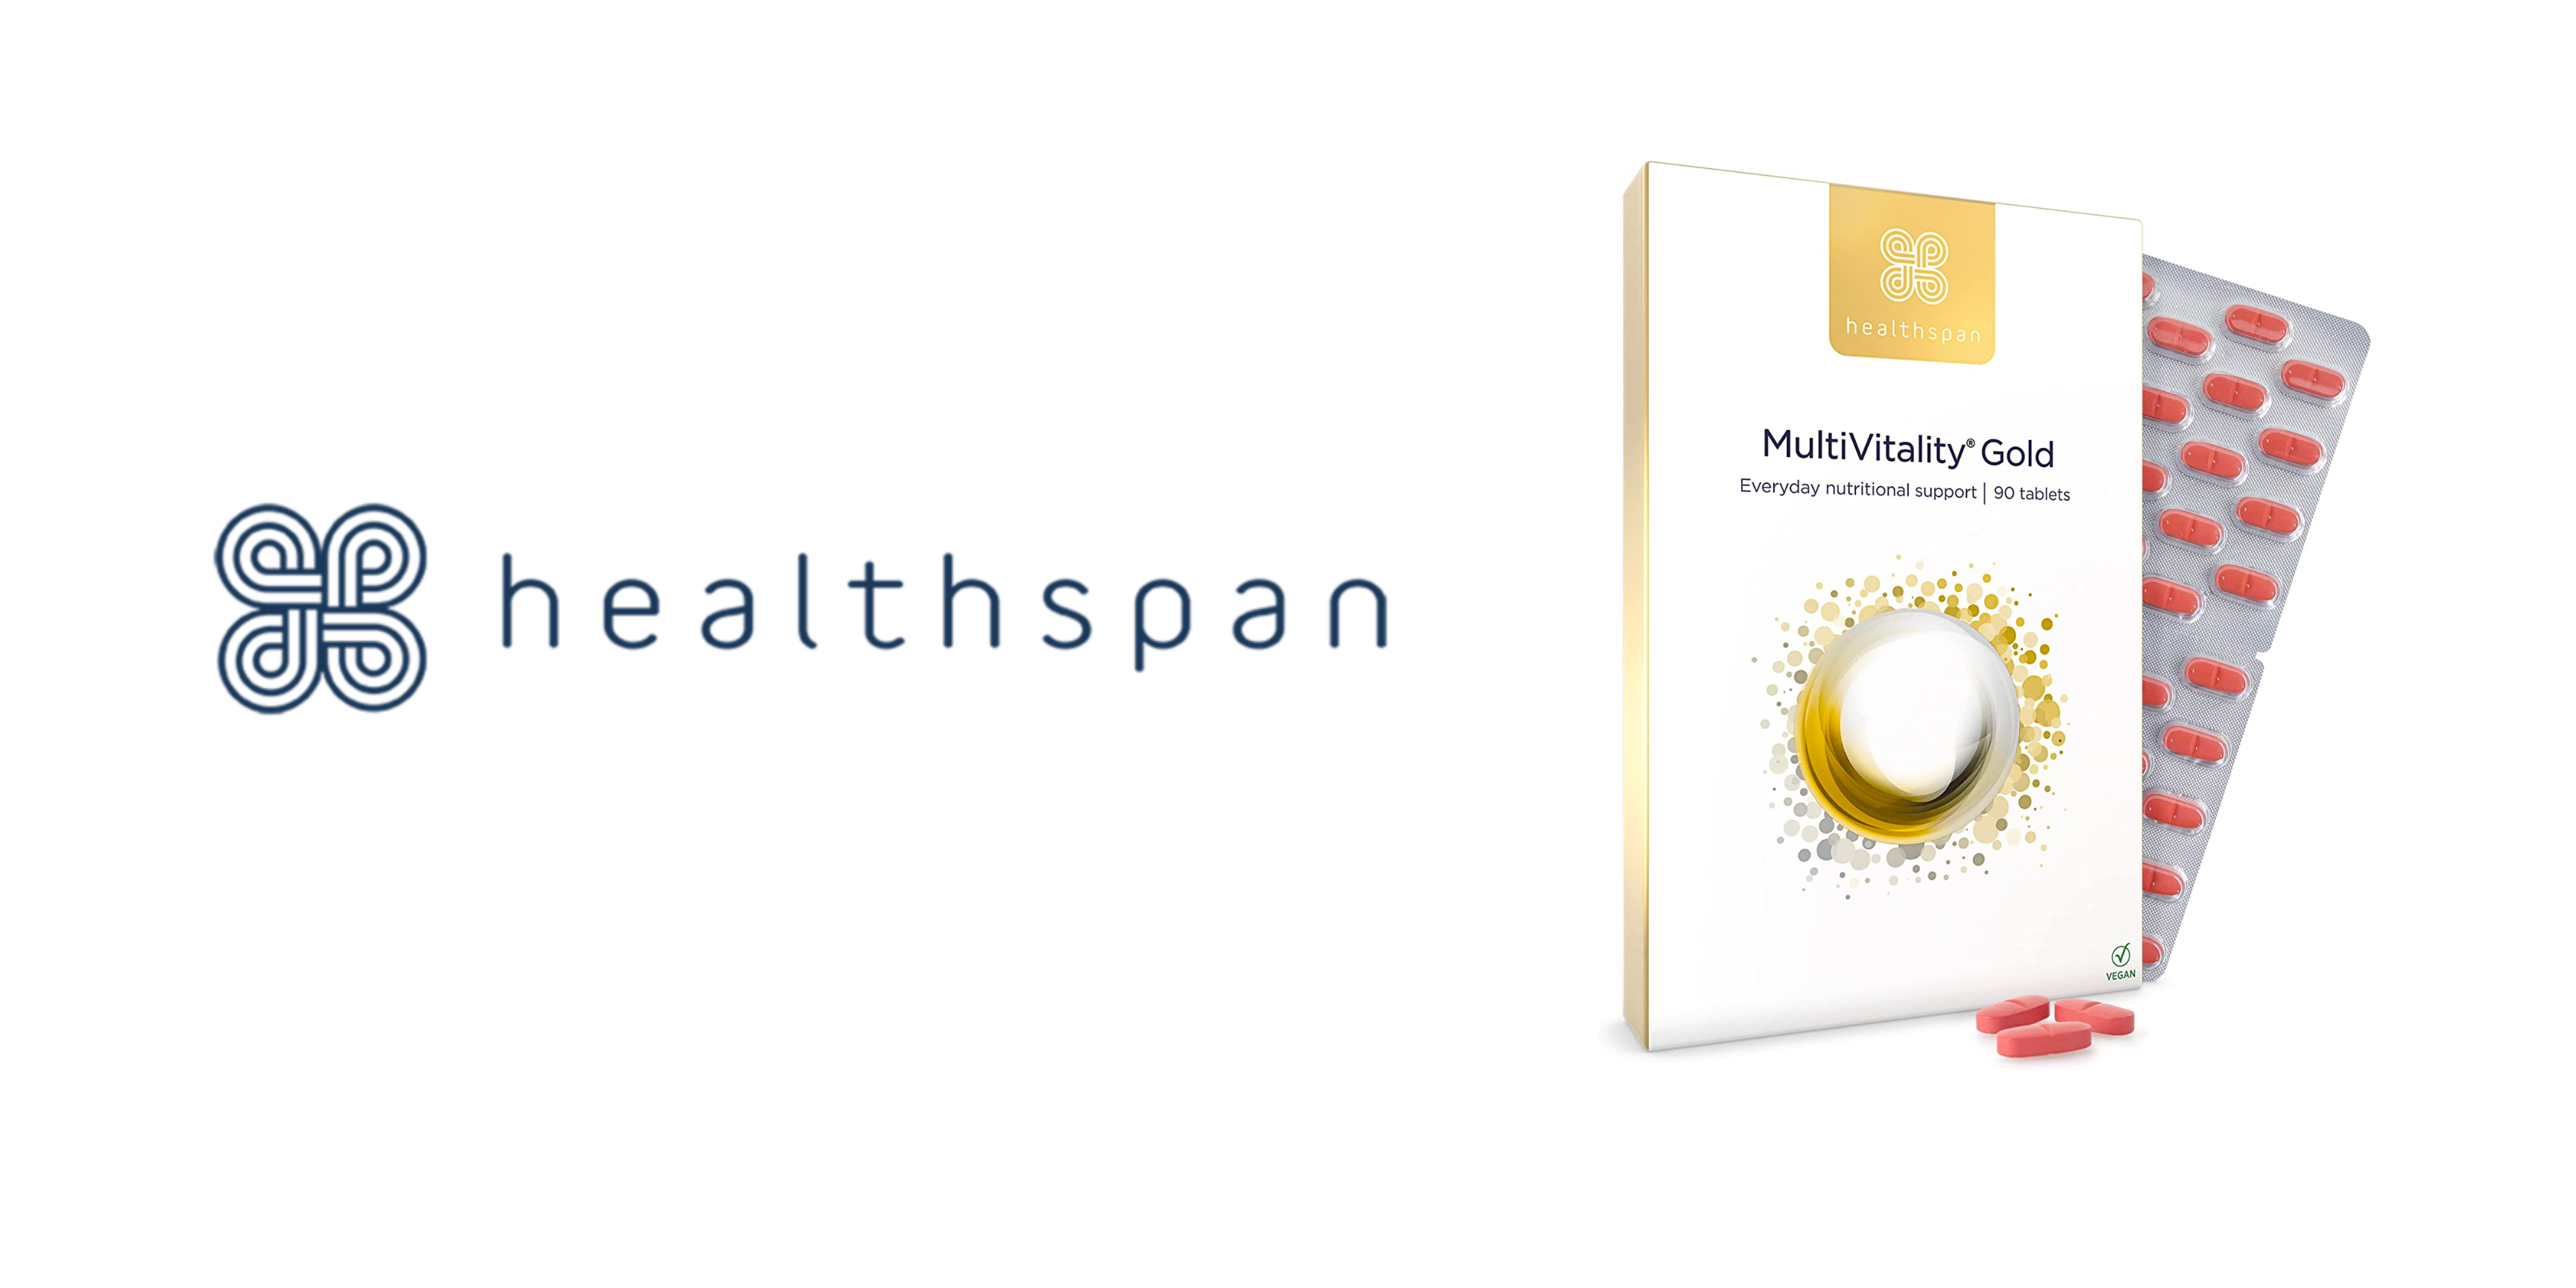 Healthspan Secures Listing at Well Pharmacy through Wellbeing Huddle